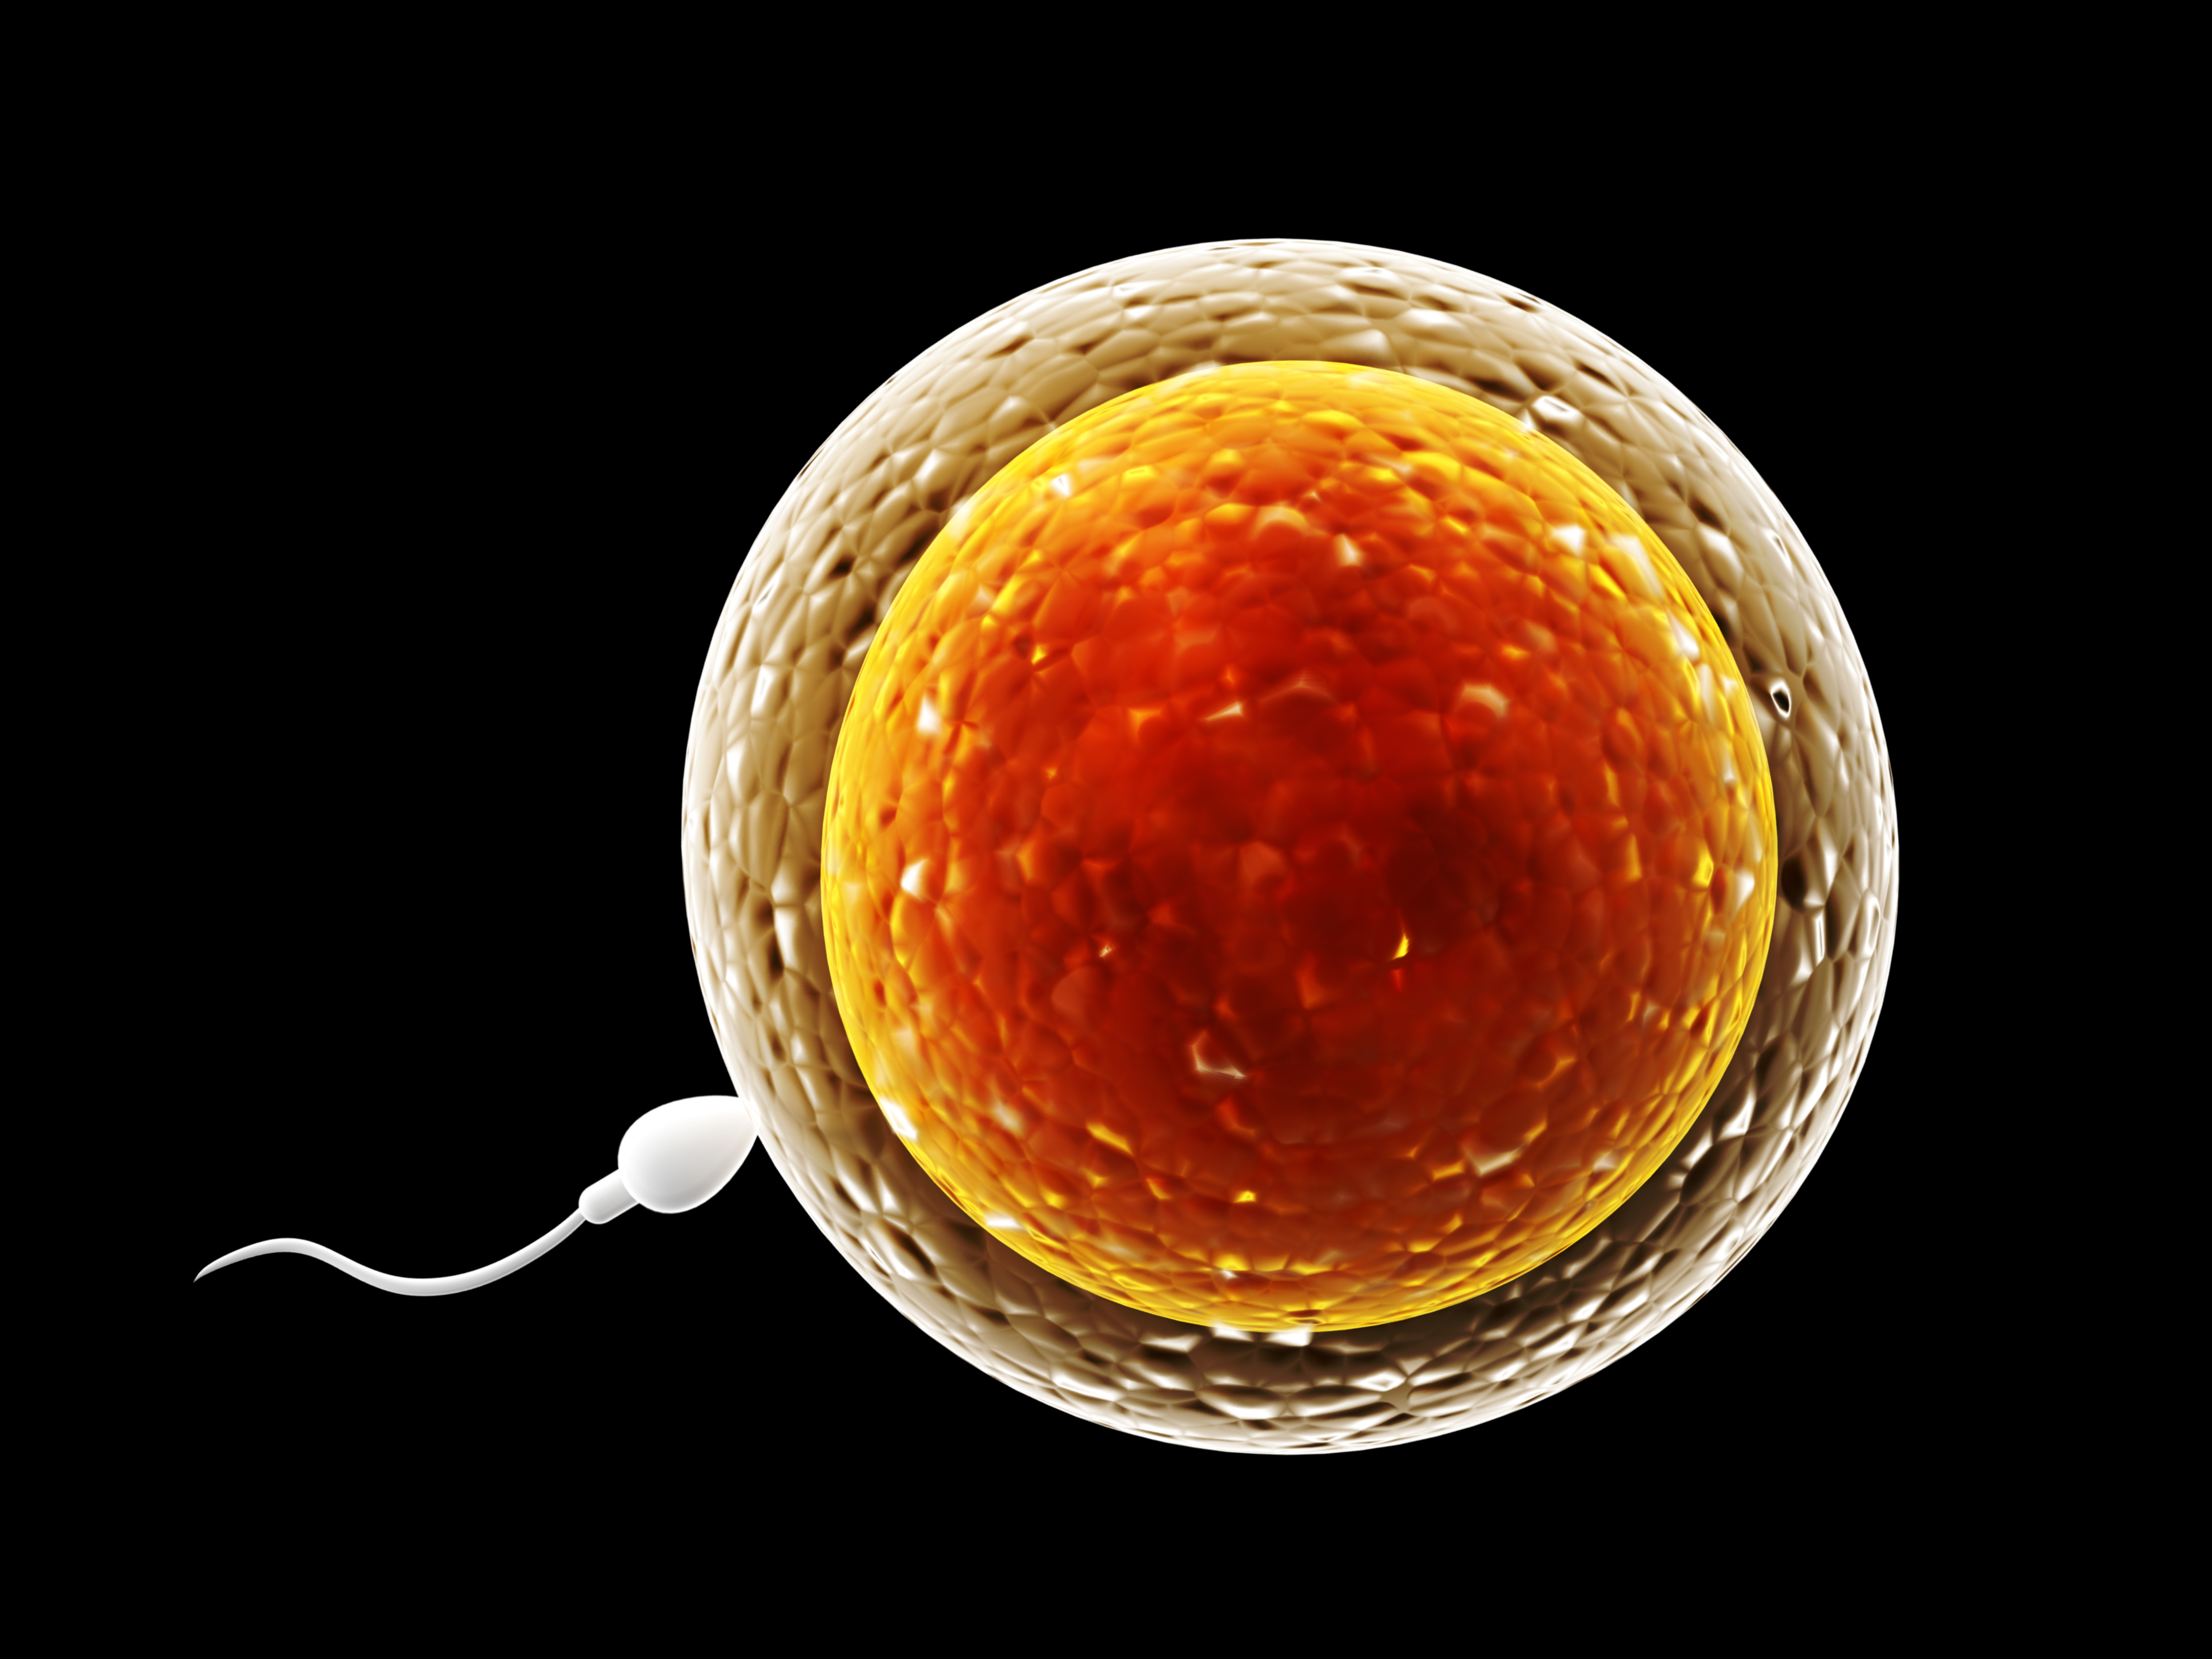 Acupuncture and Sperm Quality